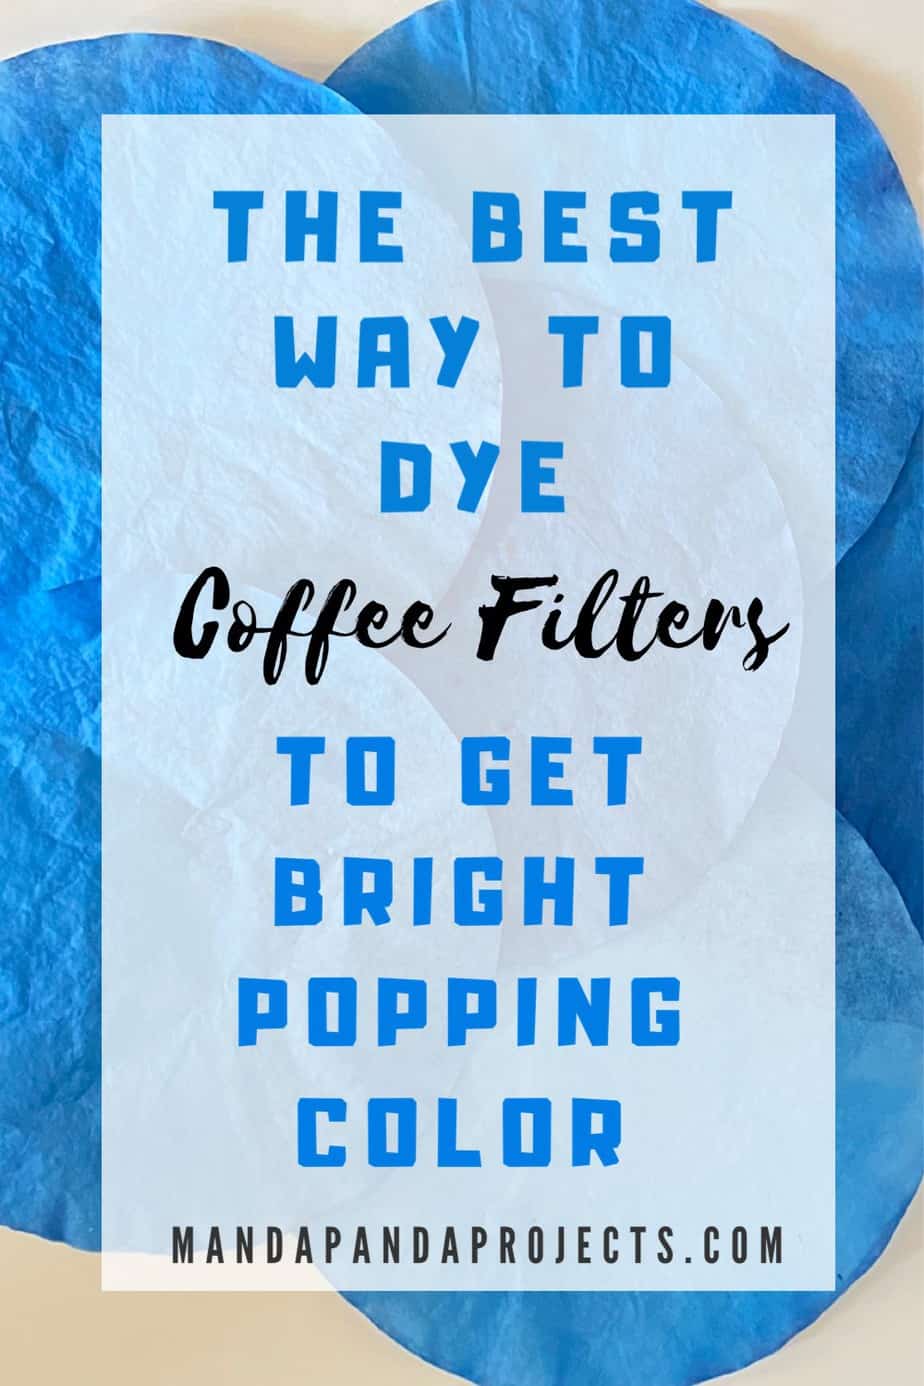 The best way to dye coffee filters to get bright popping colors